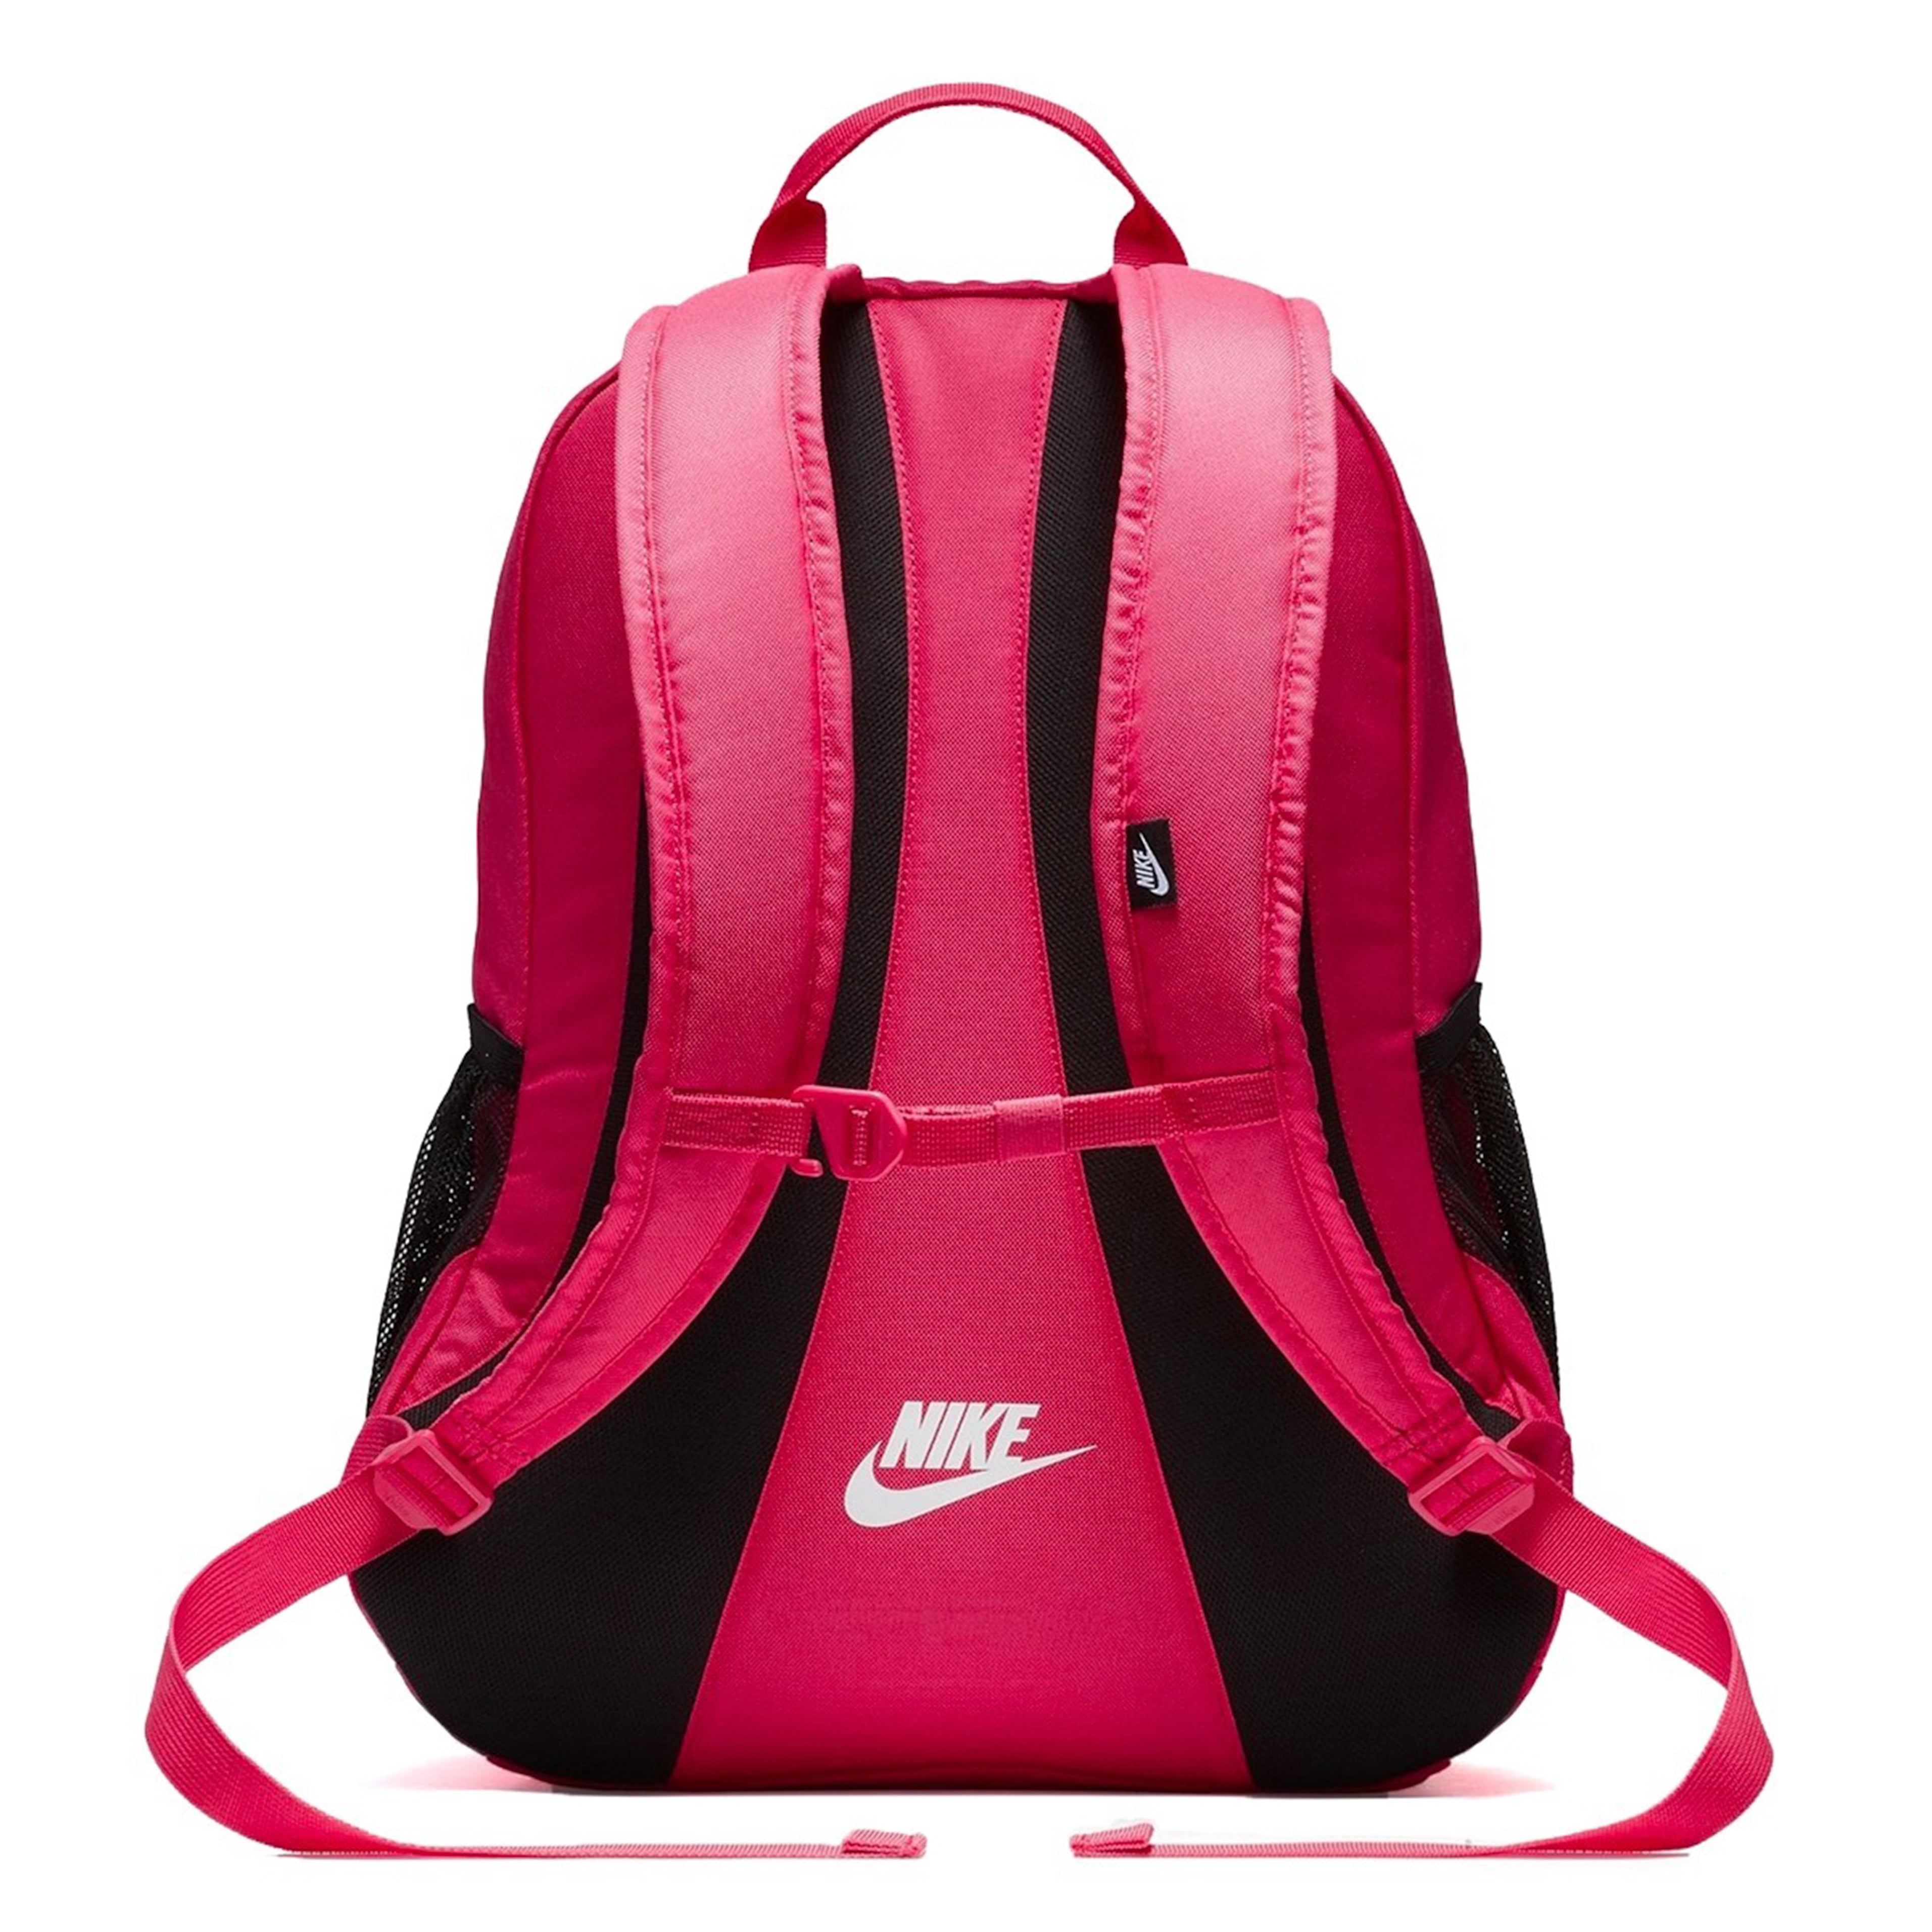 Nike Hayward Futura Backpack Grey And Pink Sale 51 Off Empow Her Com